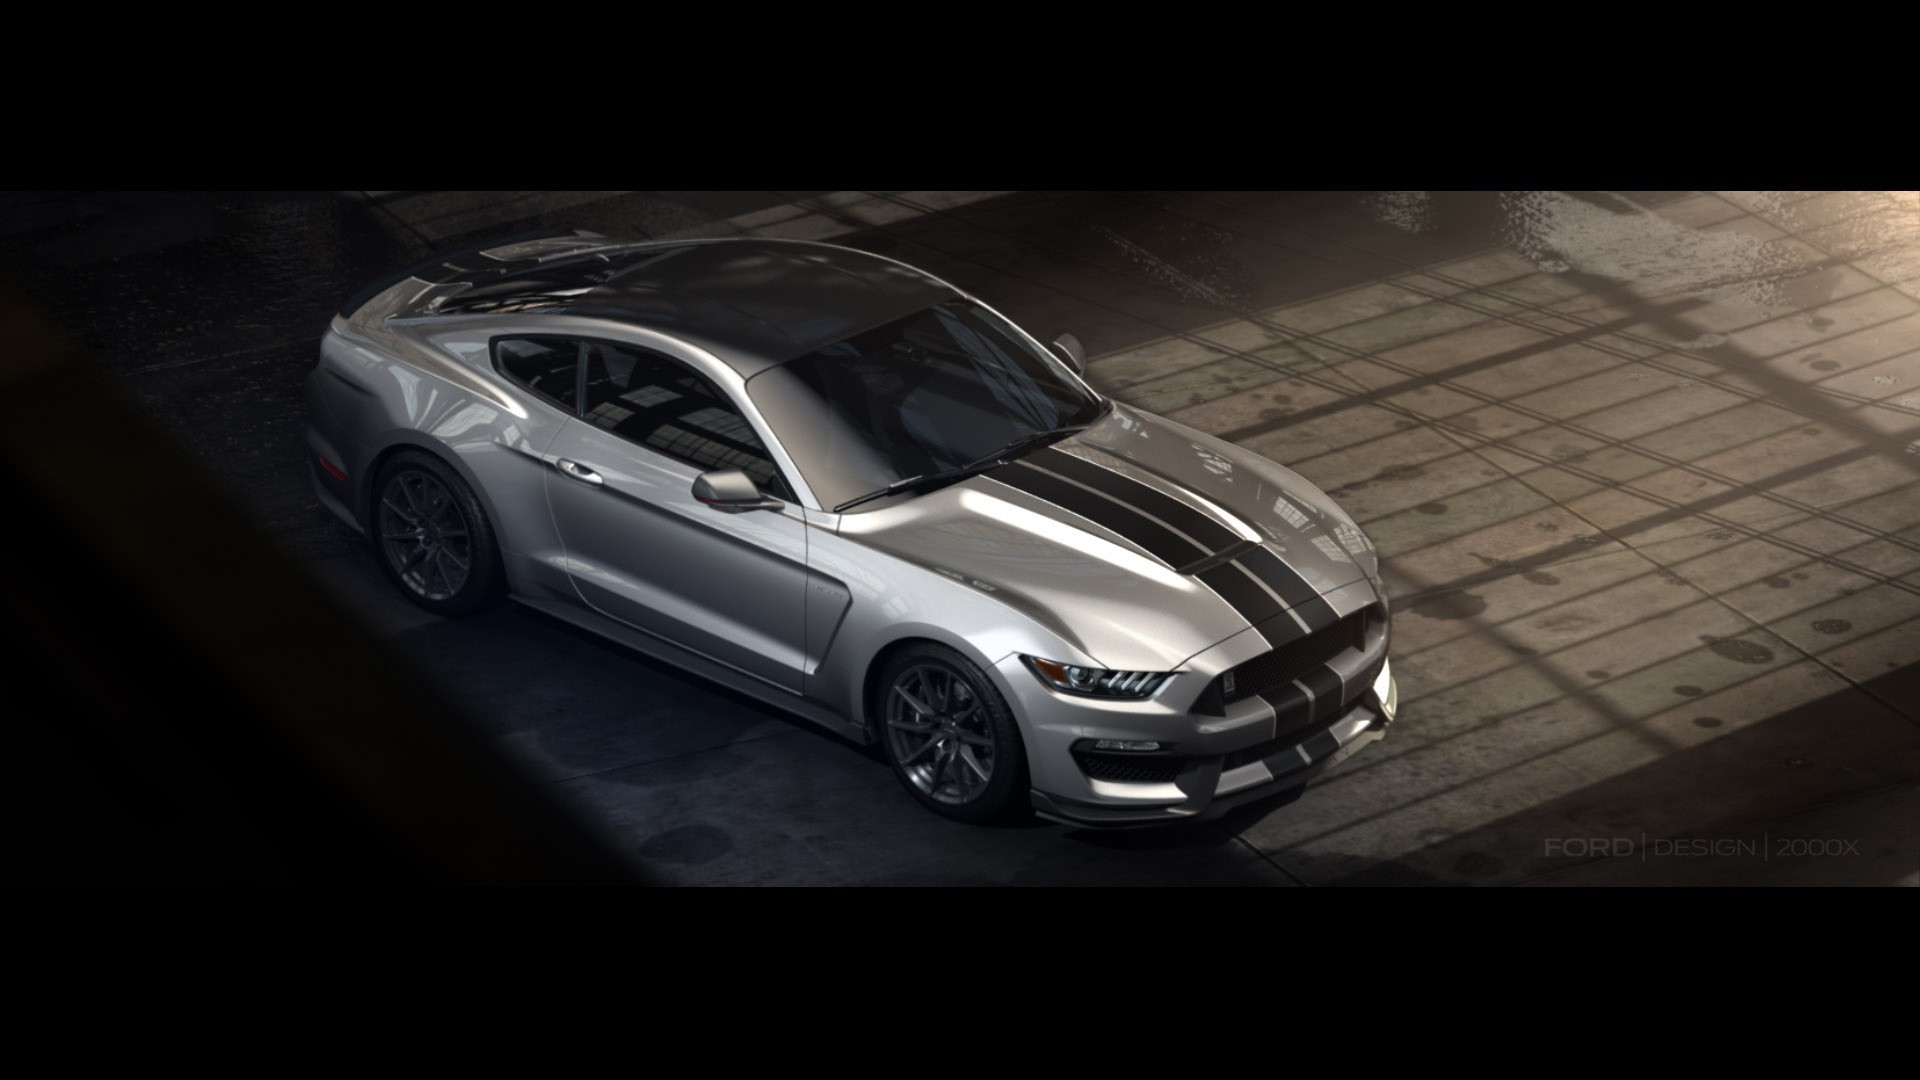 1920x1080  car ford mustang shelby shelby gt 350 wallpaper and background  JPG 169 kB